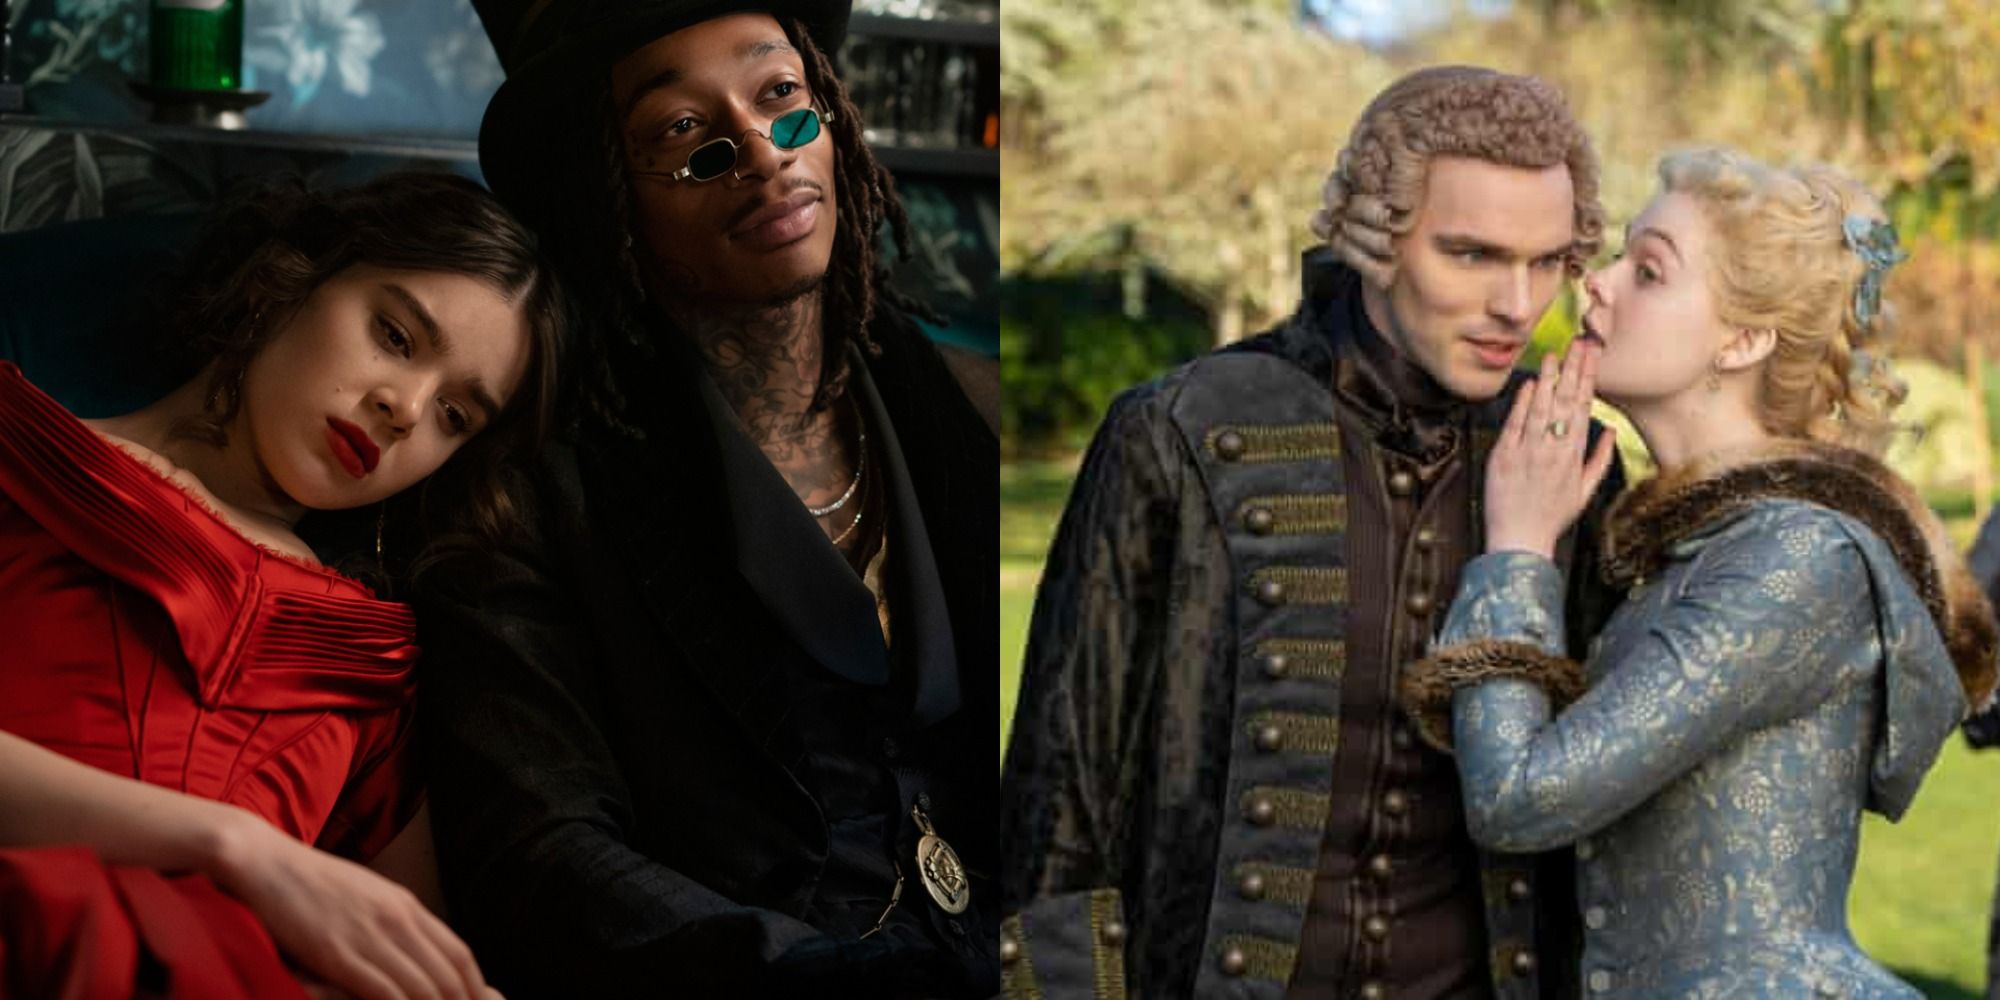 Emily Dickinson (Hailee Steinfeld) leaning against Death (Wiz Khalifa) in Dickinson beside an image of Catherine (Elle Fanning) whispering to Peter III (Nicholas Hoult) in The Great